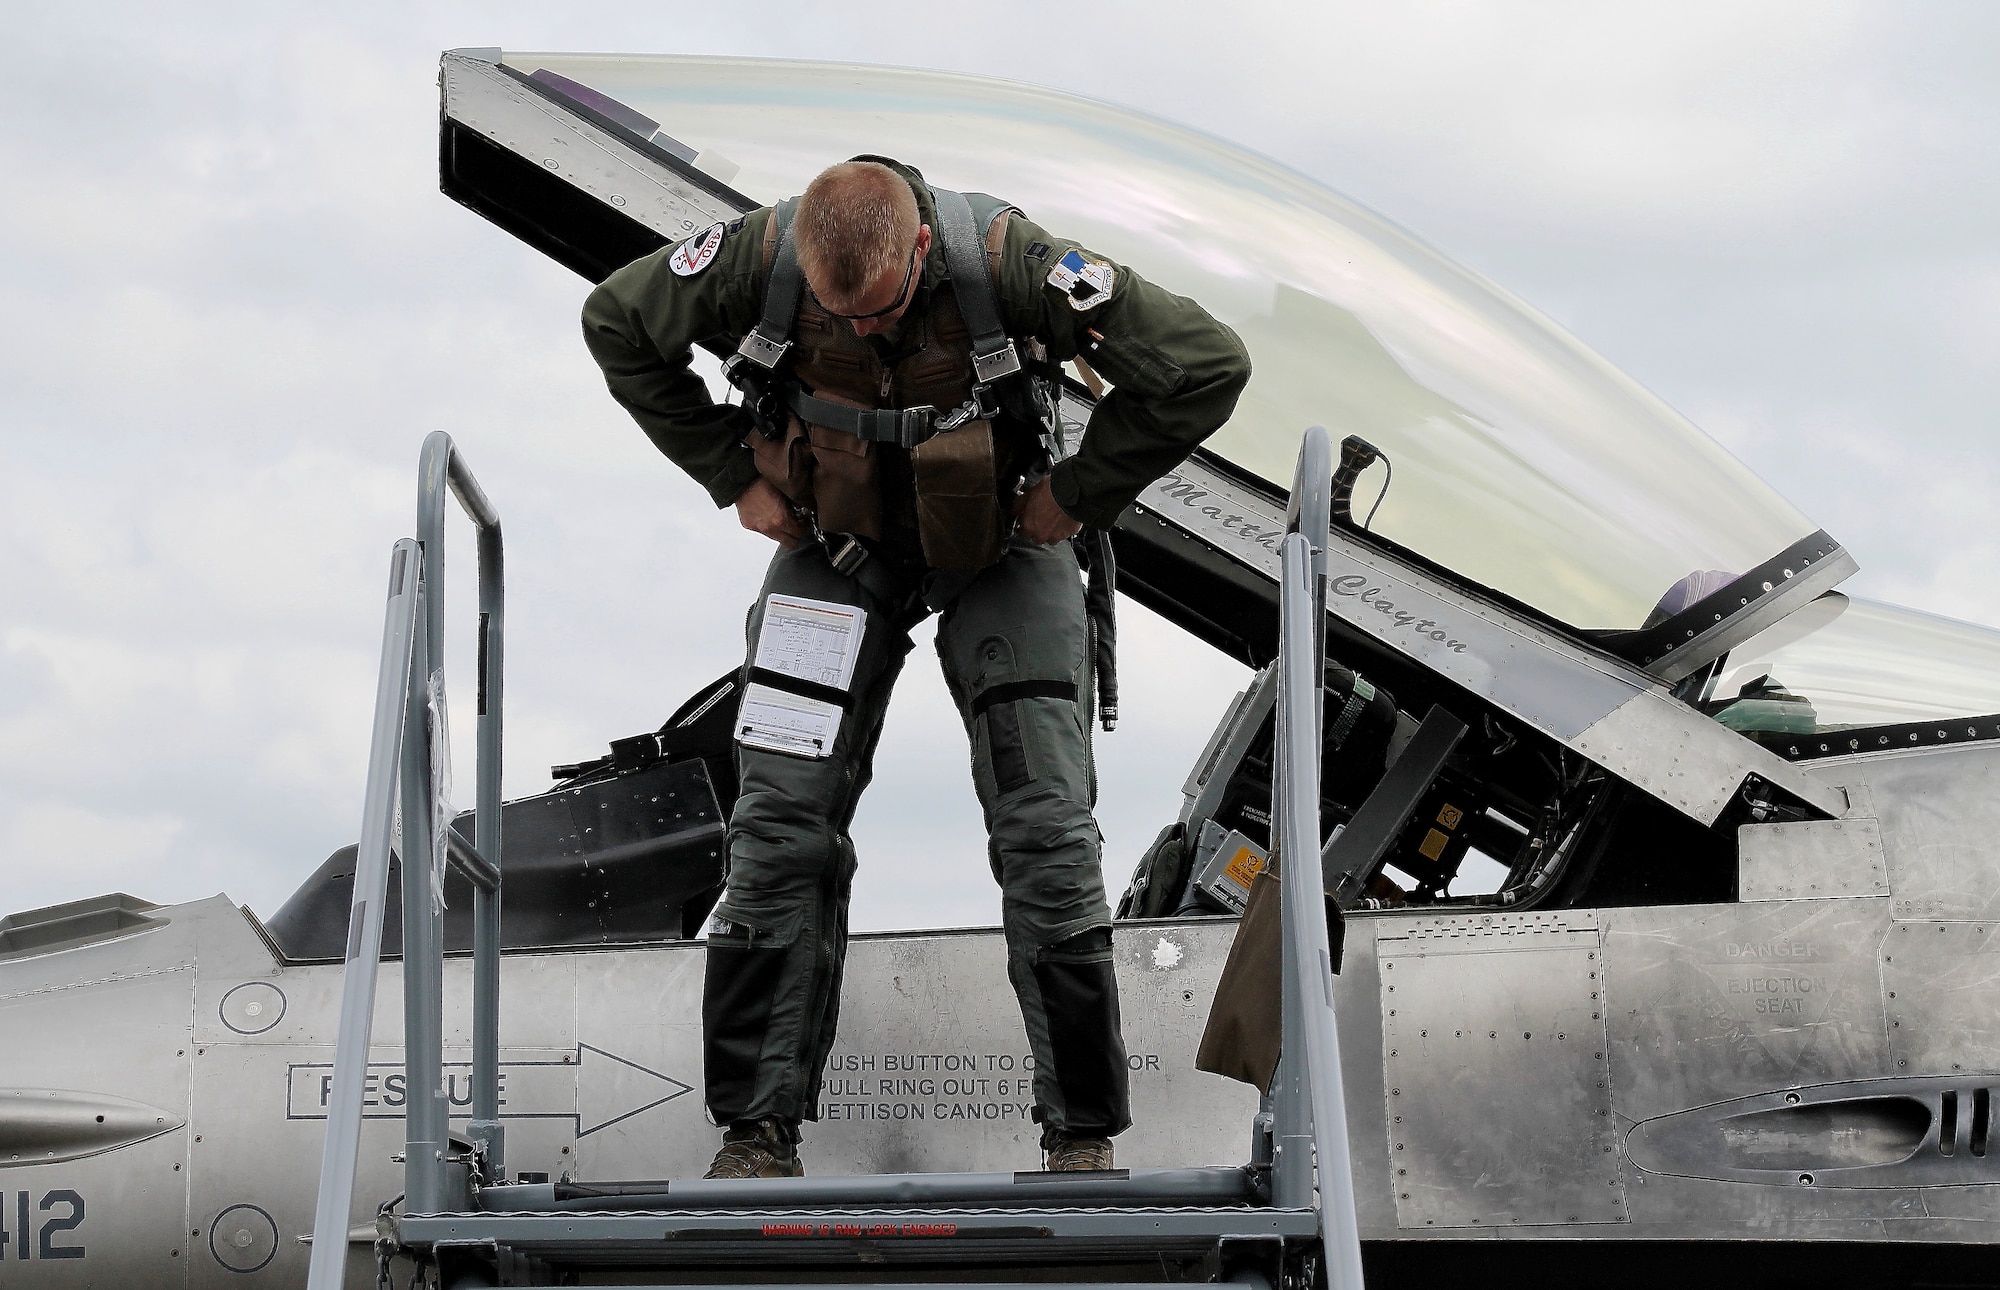 U.S. Air Force Capt. Casey Manning, F-16 Fighting Falcon fighter aircraft pilot from Spangdahlem Air Base, Germany, performs post-flight procedures shortly after arriving at this year’s Berlin Trade and Air Show, Berlin, May 20, 2014. The U.S. aircraft on the ramp were open for spectators and vendors within the aerospace industry to observe and interact with all crew members who not only operate the aircraft, but also maintain them. (U.S. Air Force photo by 2nd Lt. Clay Lancaster/Released)